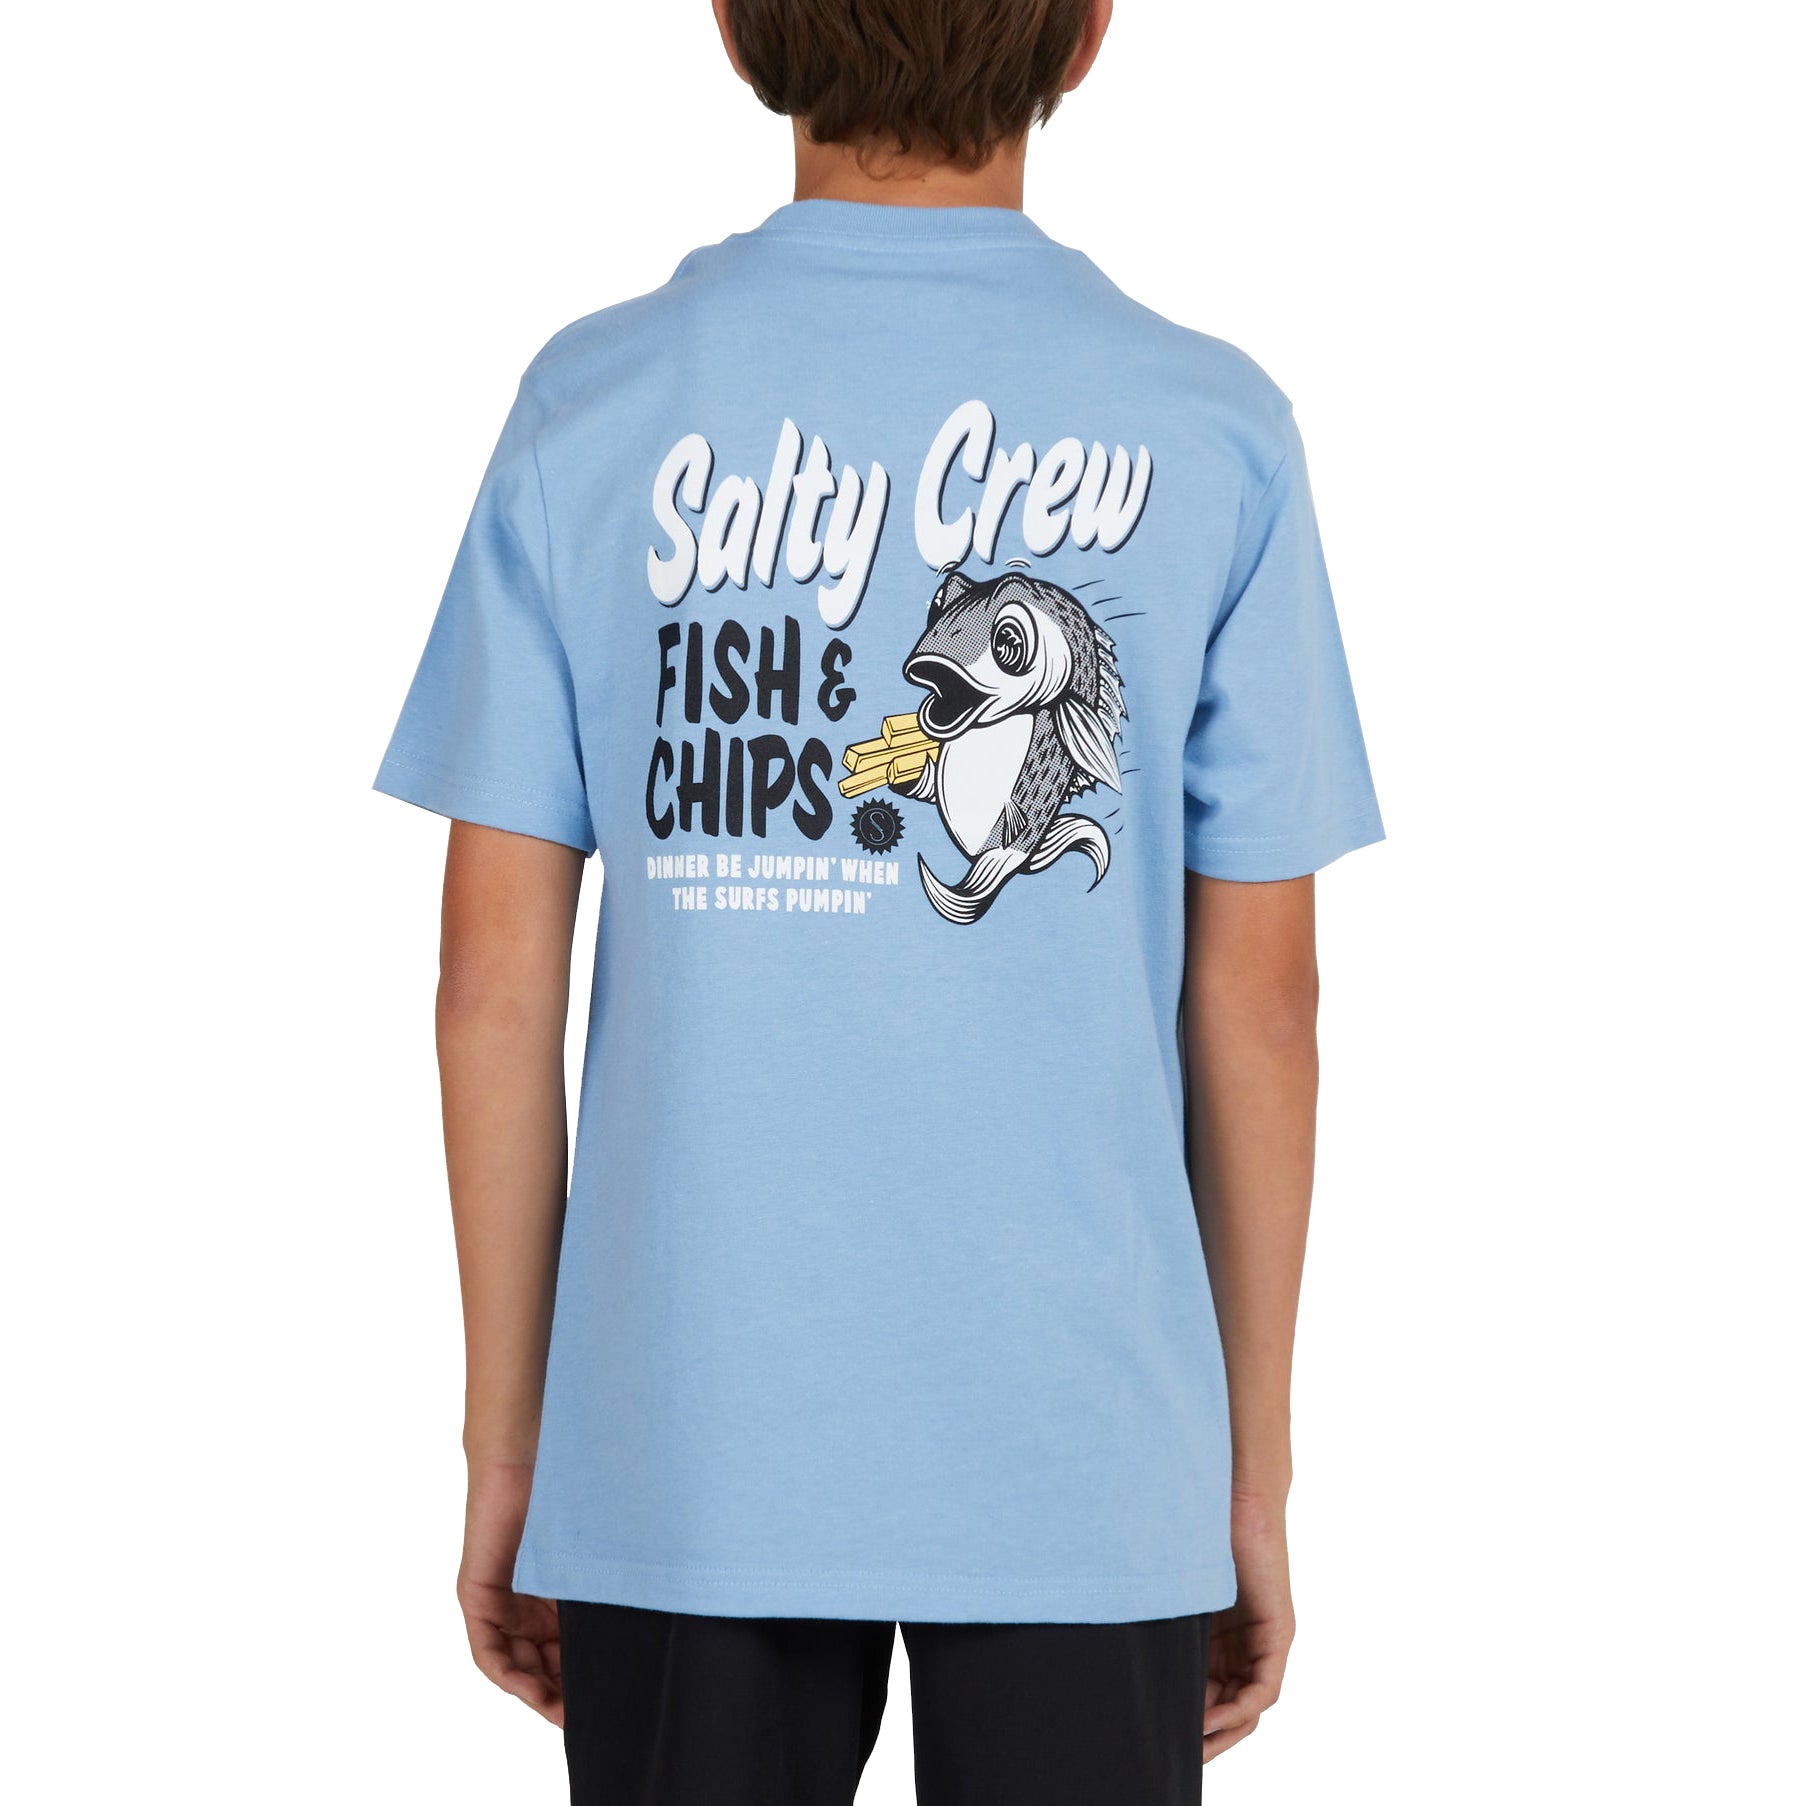 Salty Crew Fish and Chips Boys SS Tee MarineBlue S